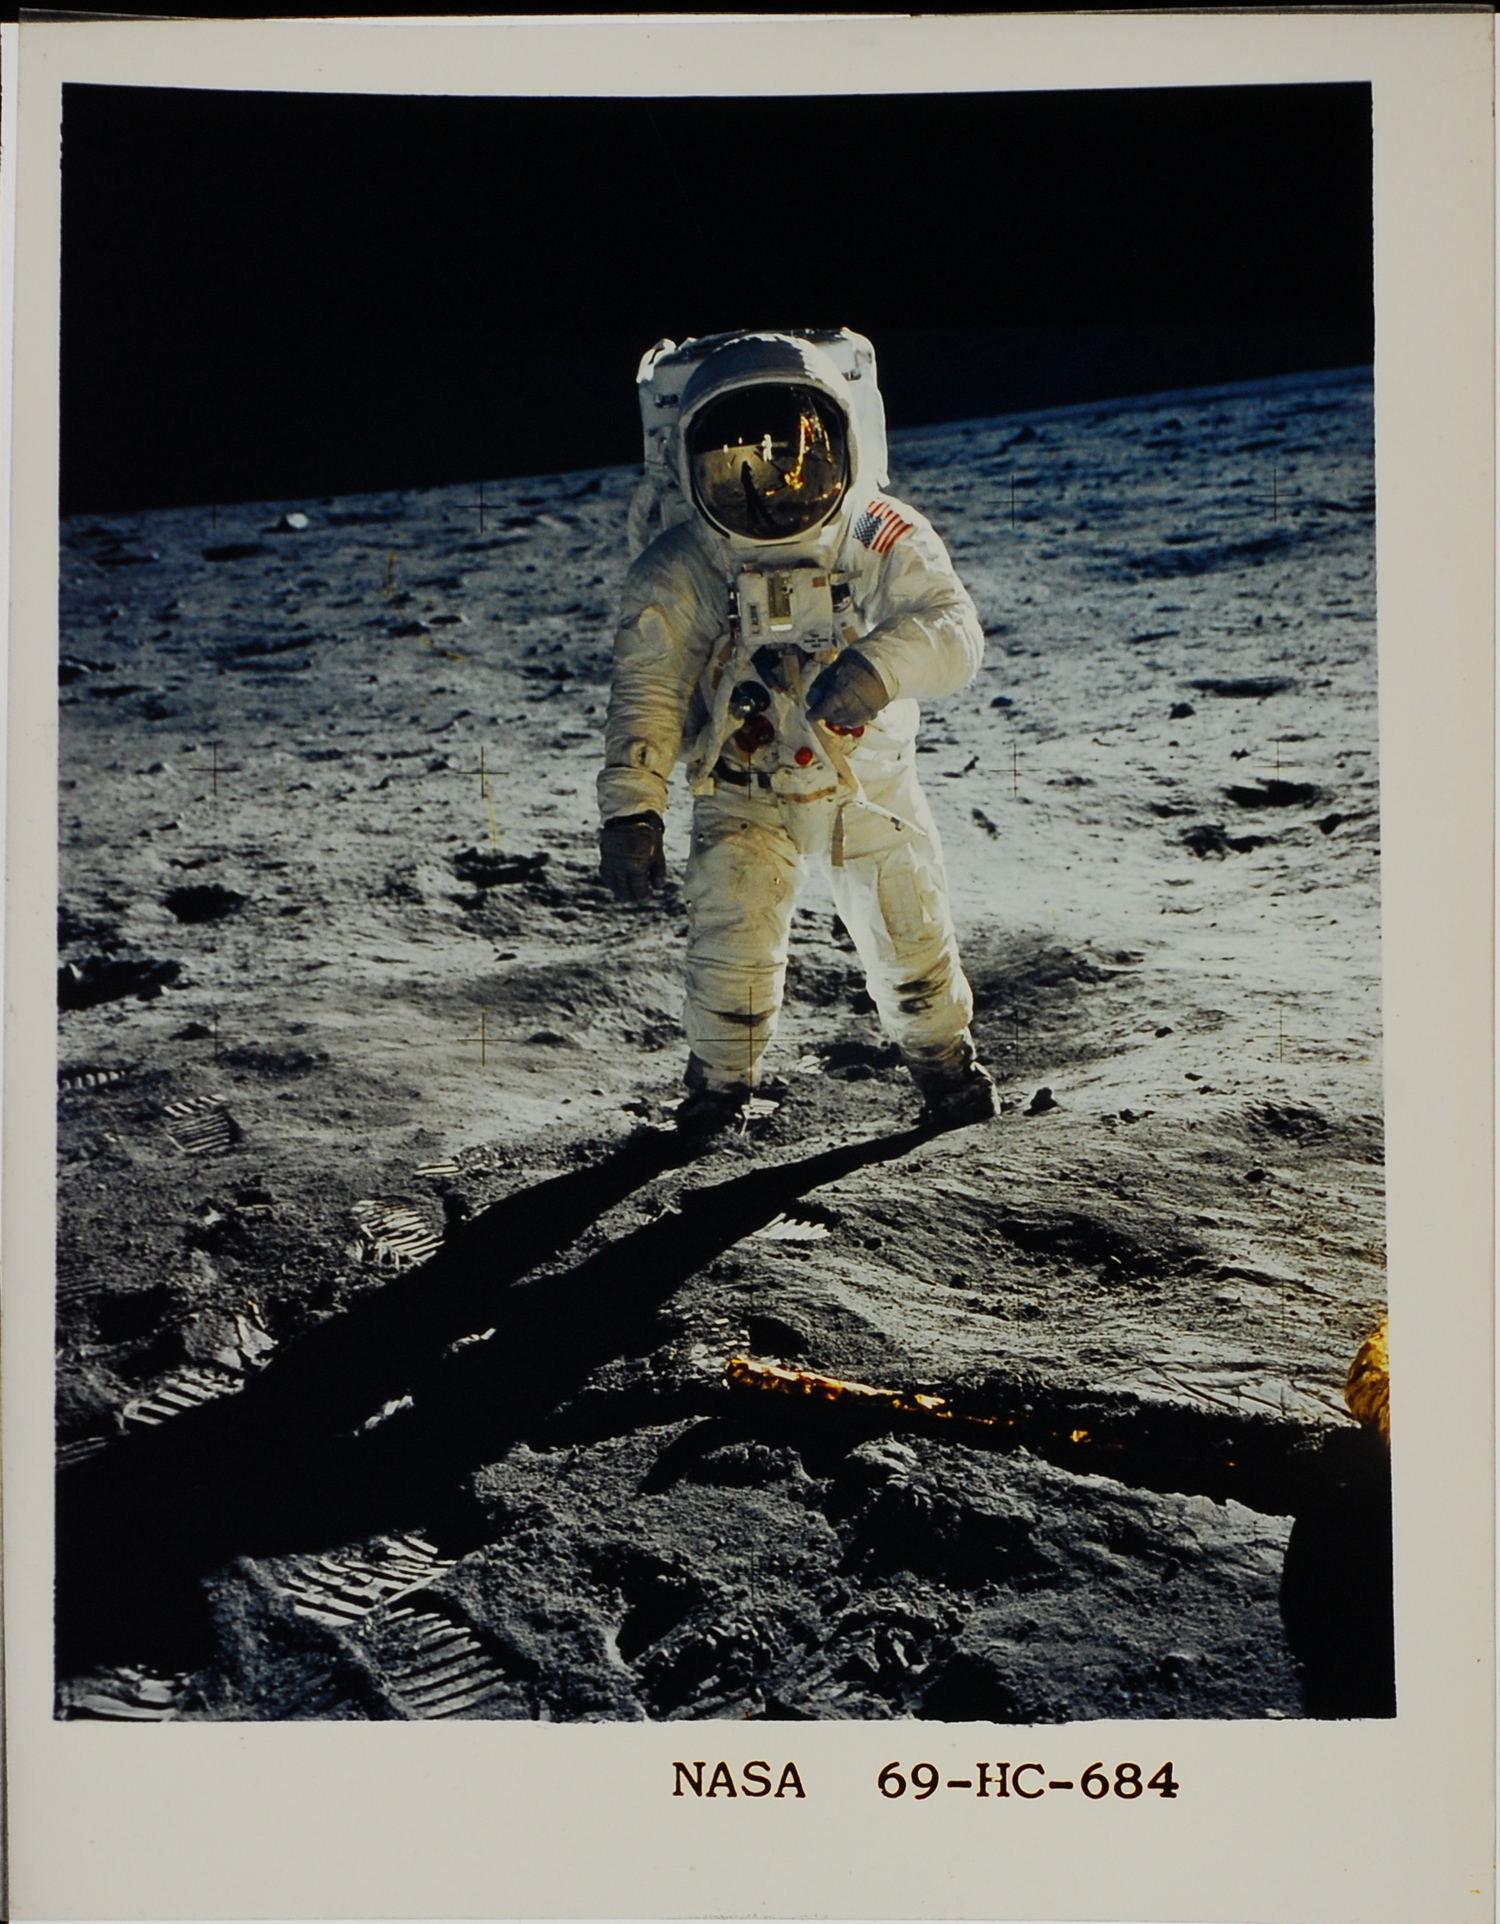 Astronaut Buzz Aldrin stands on the lunar surface, photographed by Neil Armstrong, July 1969.